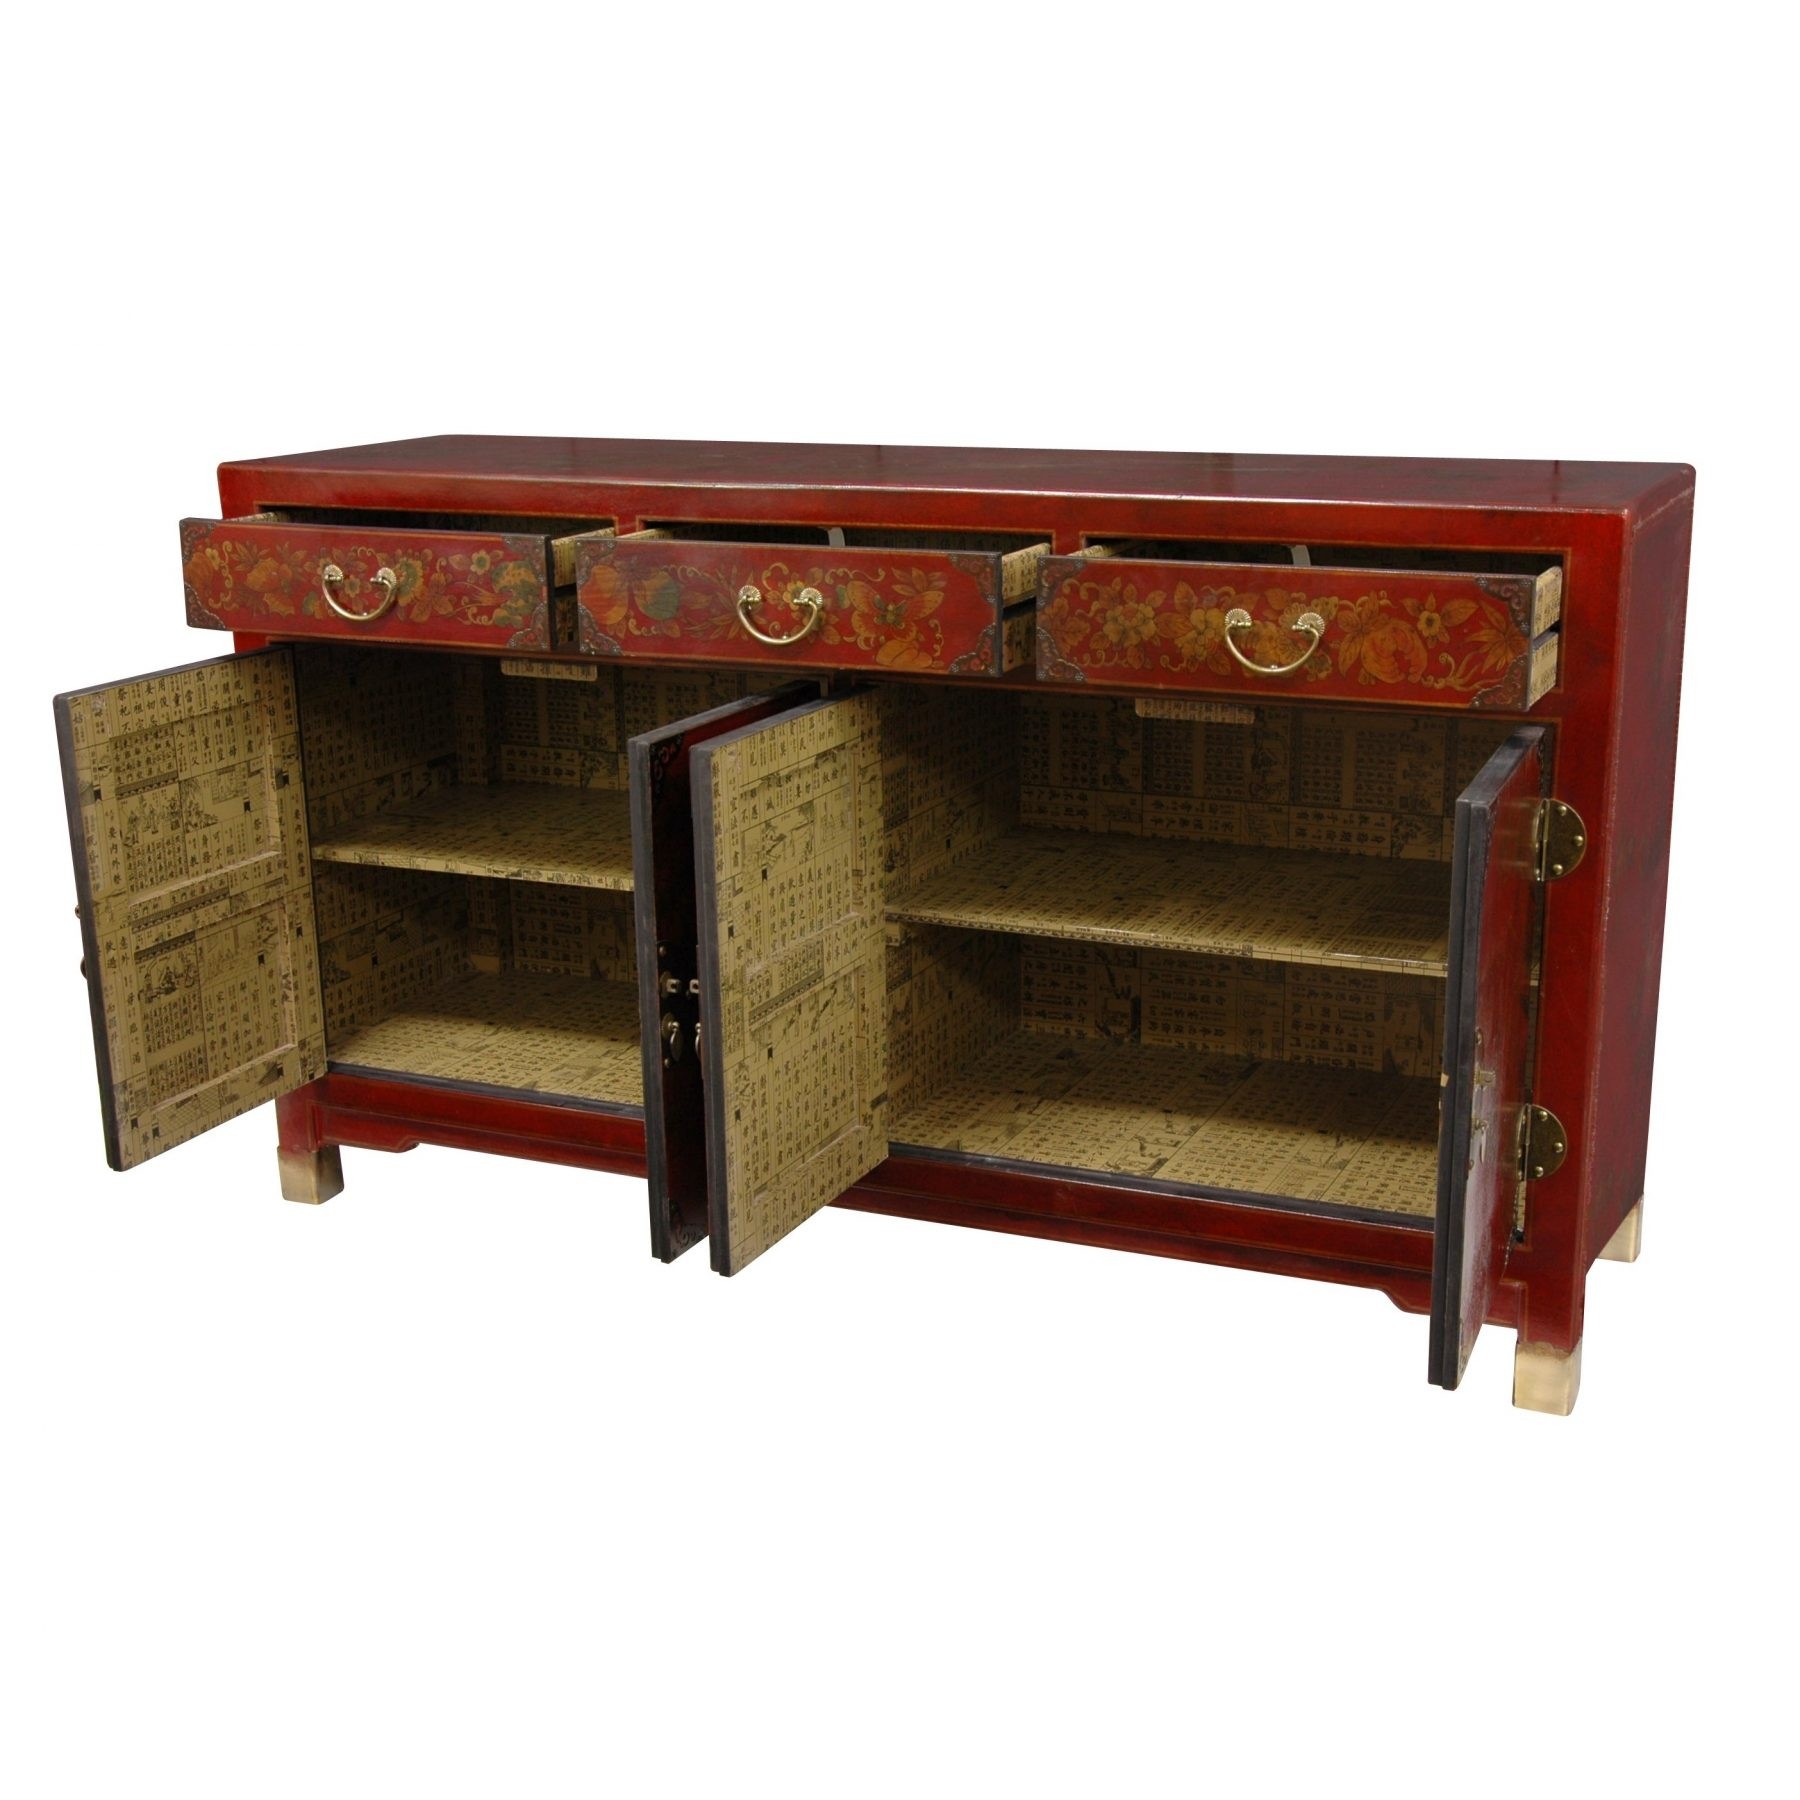 Oriental furniture red lacquer large buffet table ebay